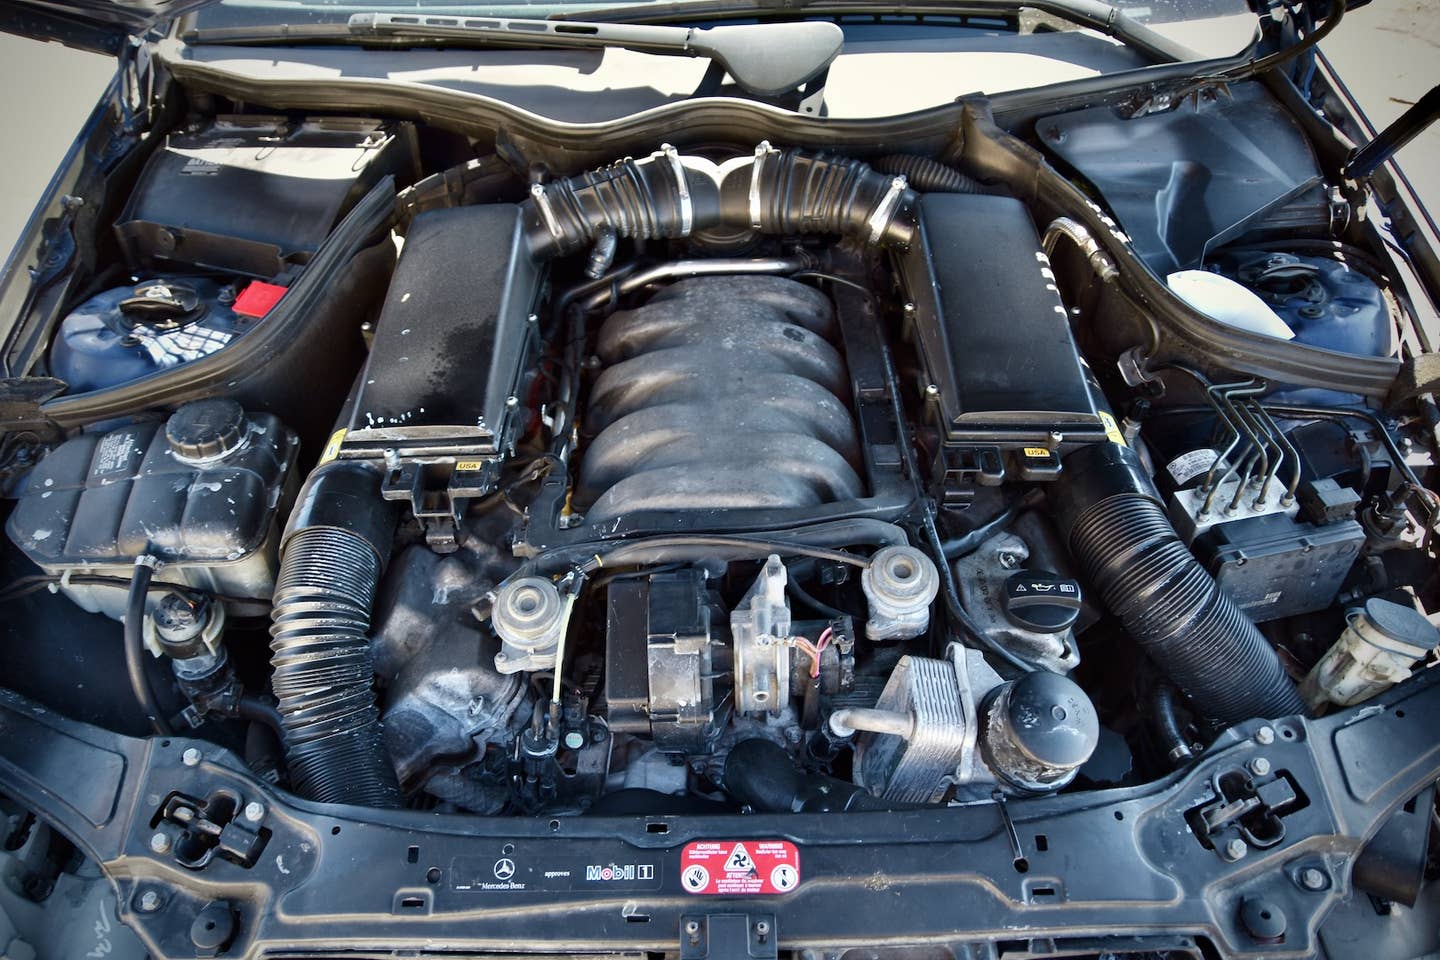 Mercedes M113 5.4-liter V8 in a C320 Sportcoupe engine bay